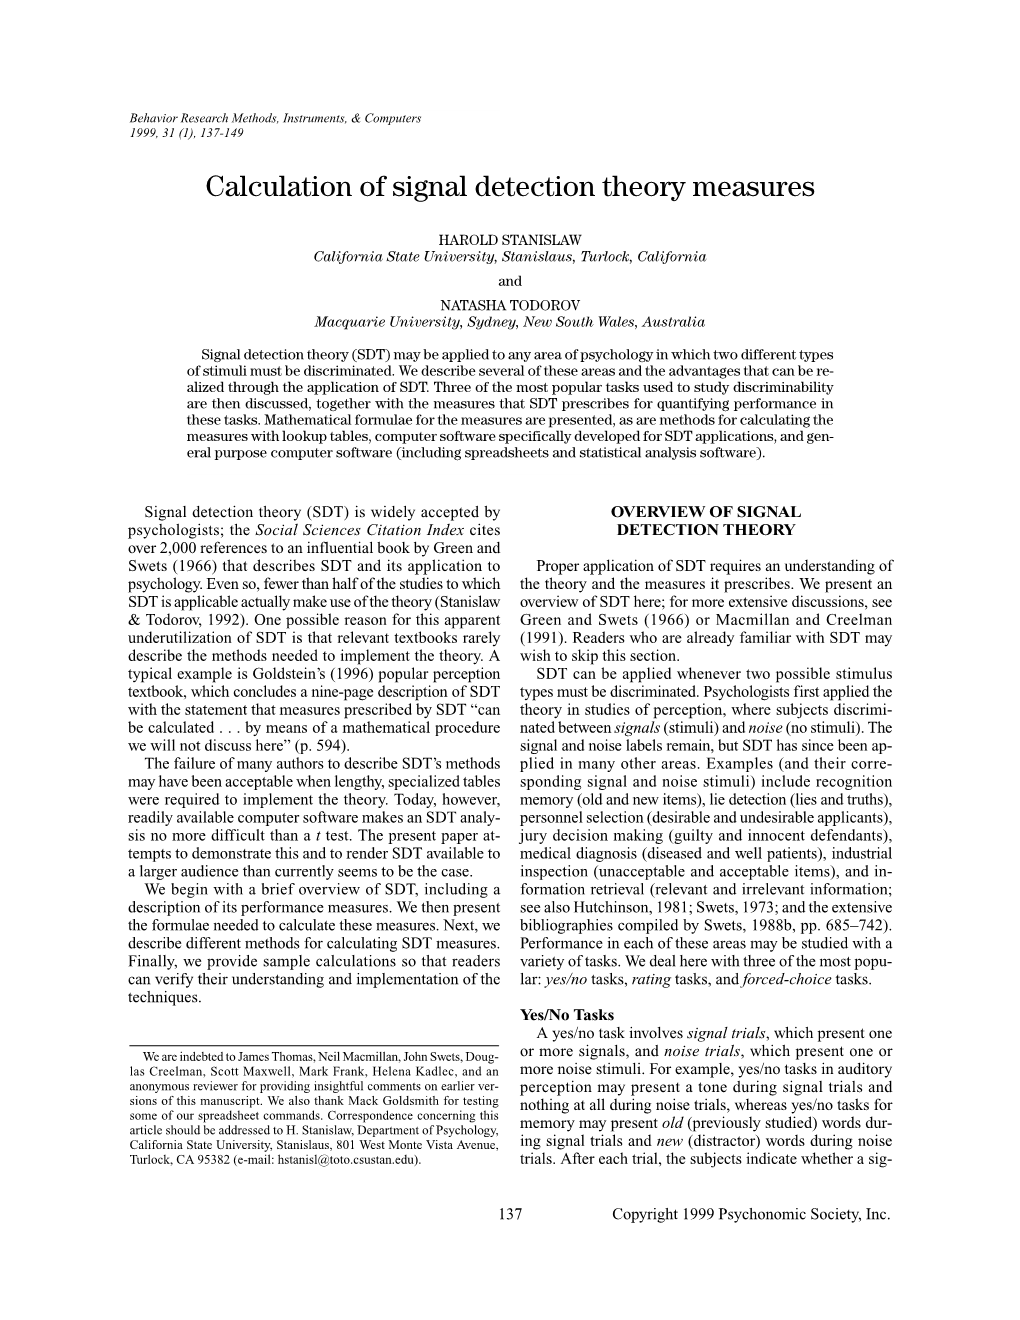 Calculation of Signal Detection Theory Measures